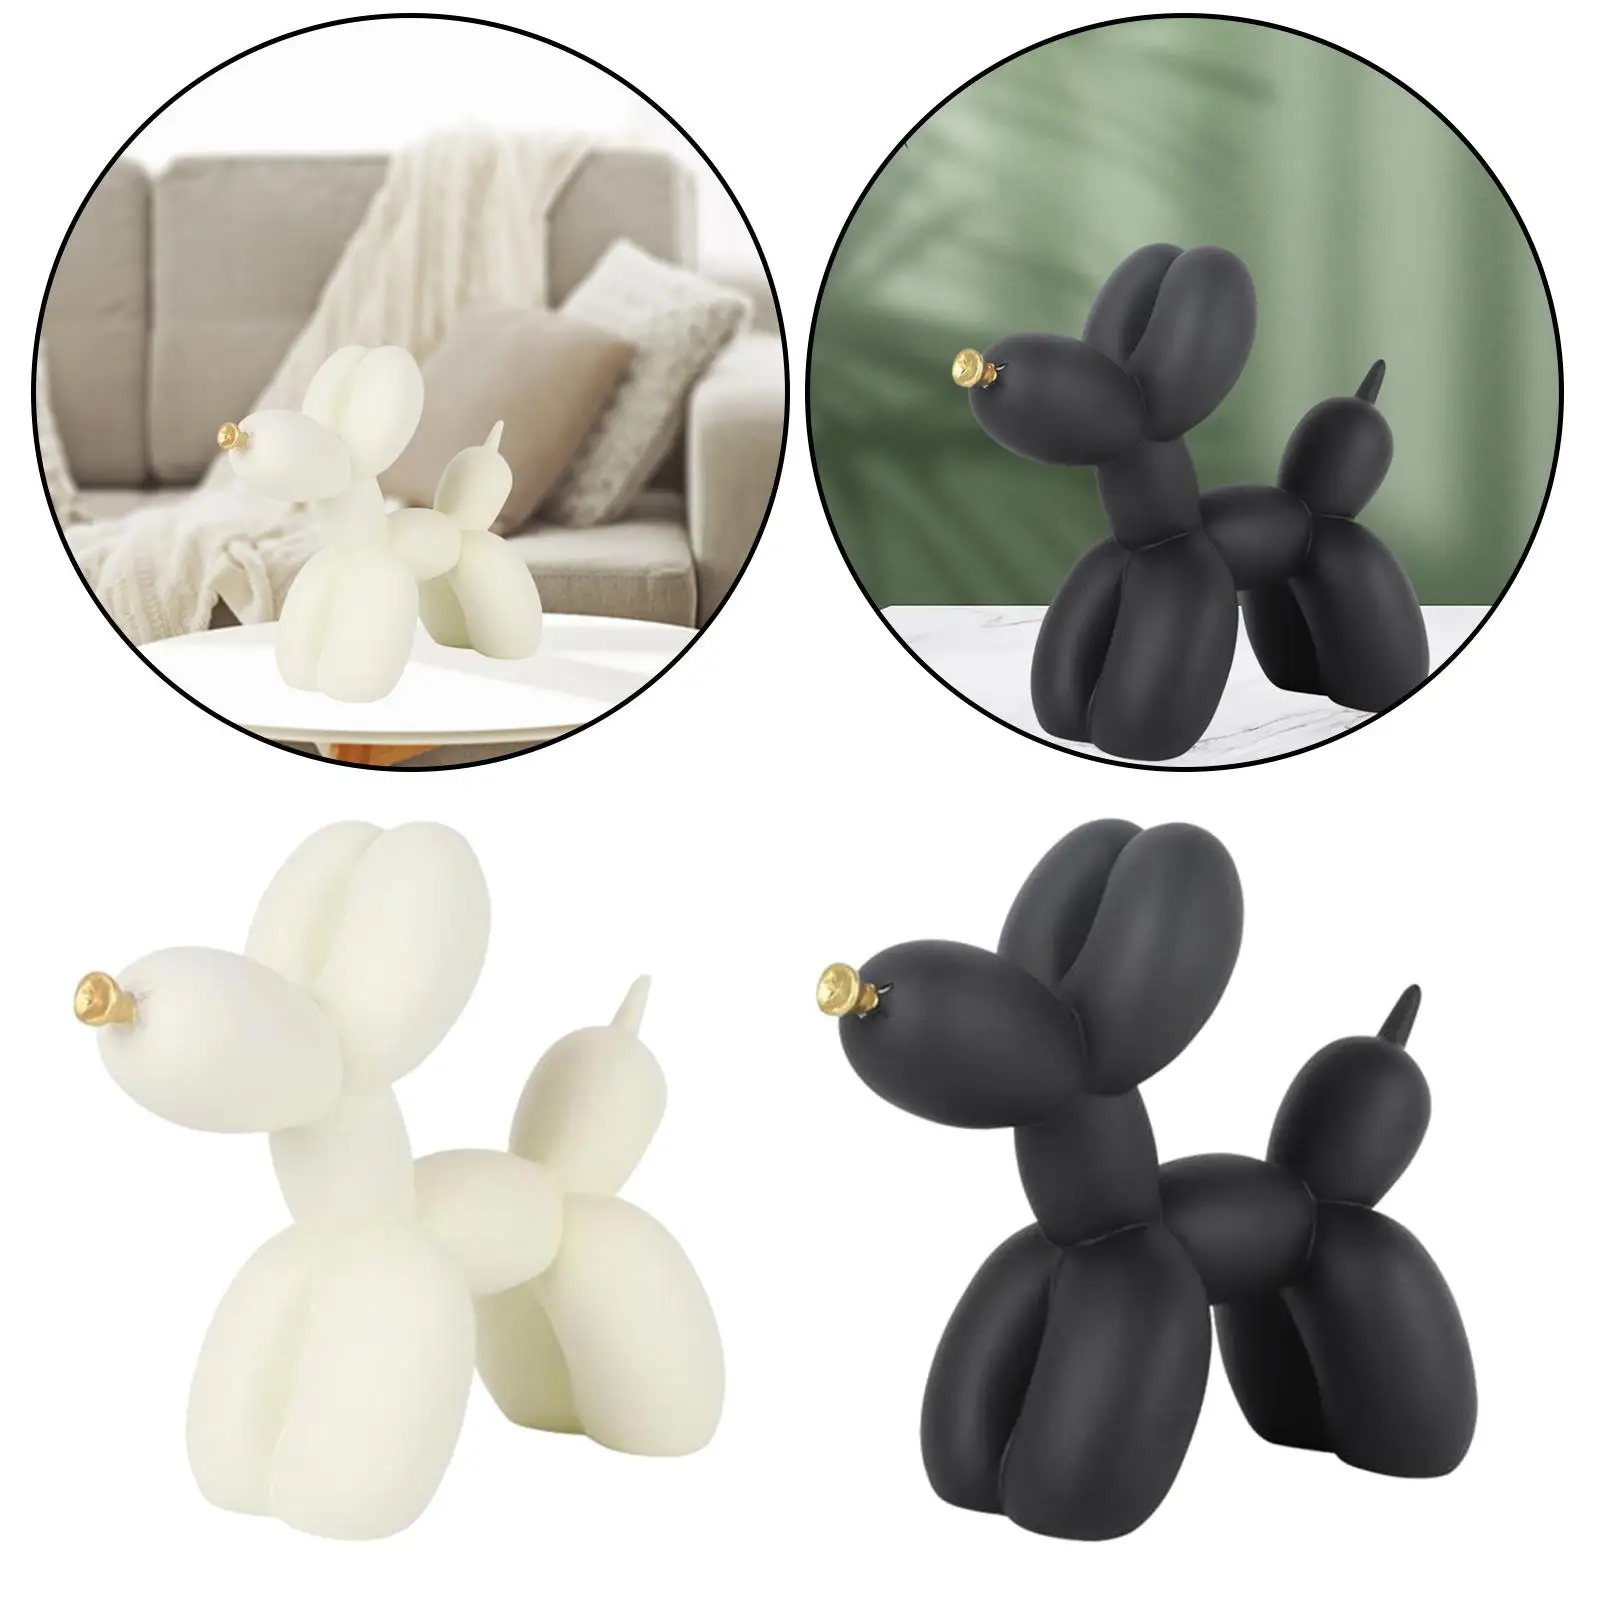 2x Balloon Dog Table Decor North European Style Family Ornament Home Decoration Party Photo Props